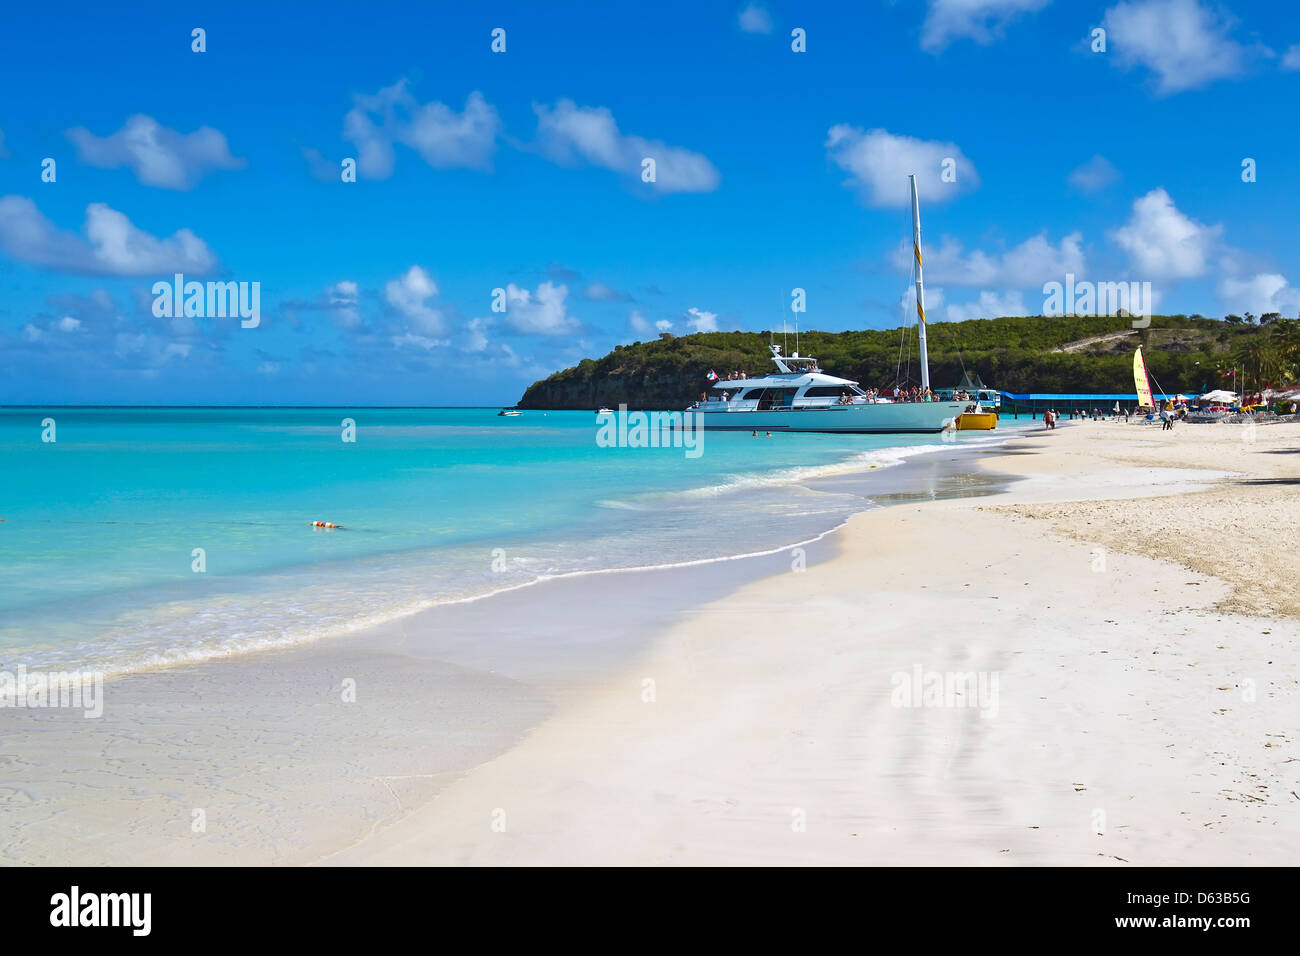 Dickinson bay and Sandals Grand Antigua Hotel, Antigua, Caribbean, West Indies Stock Photo